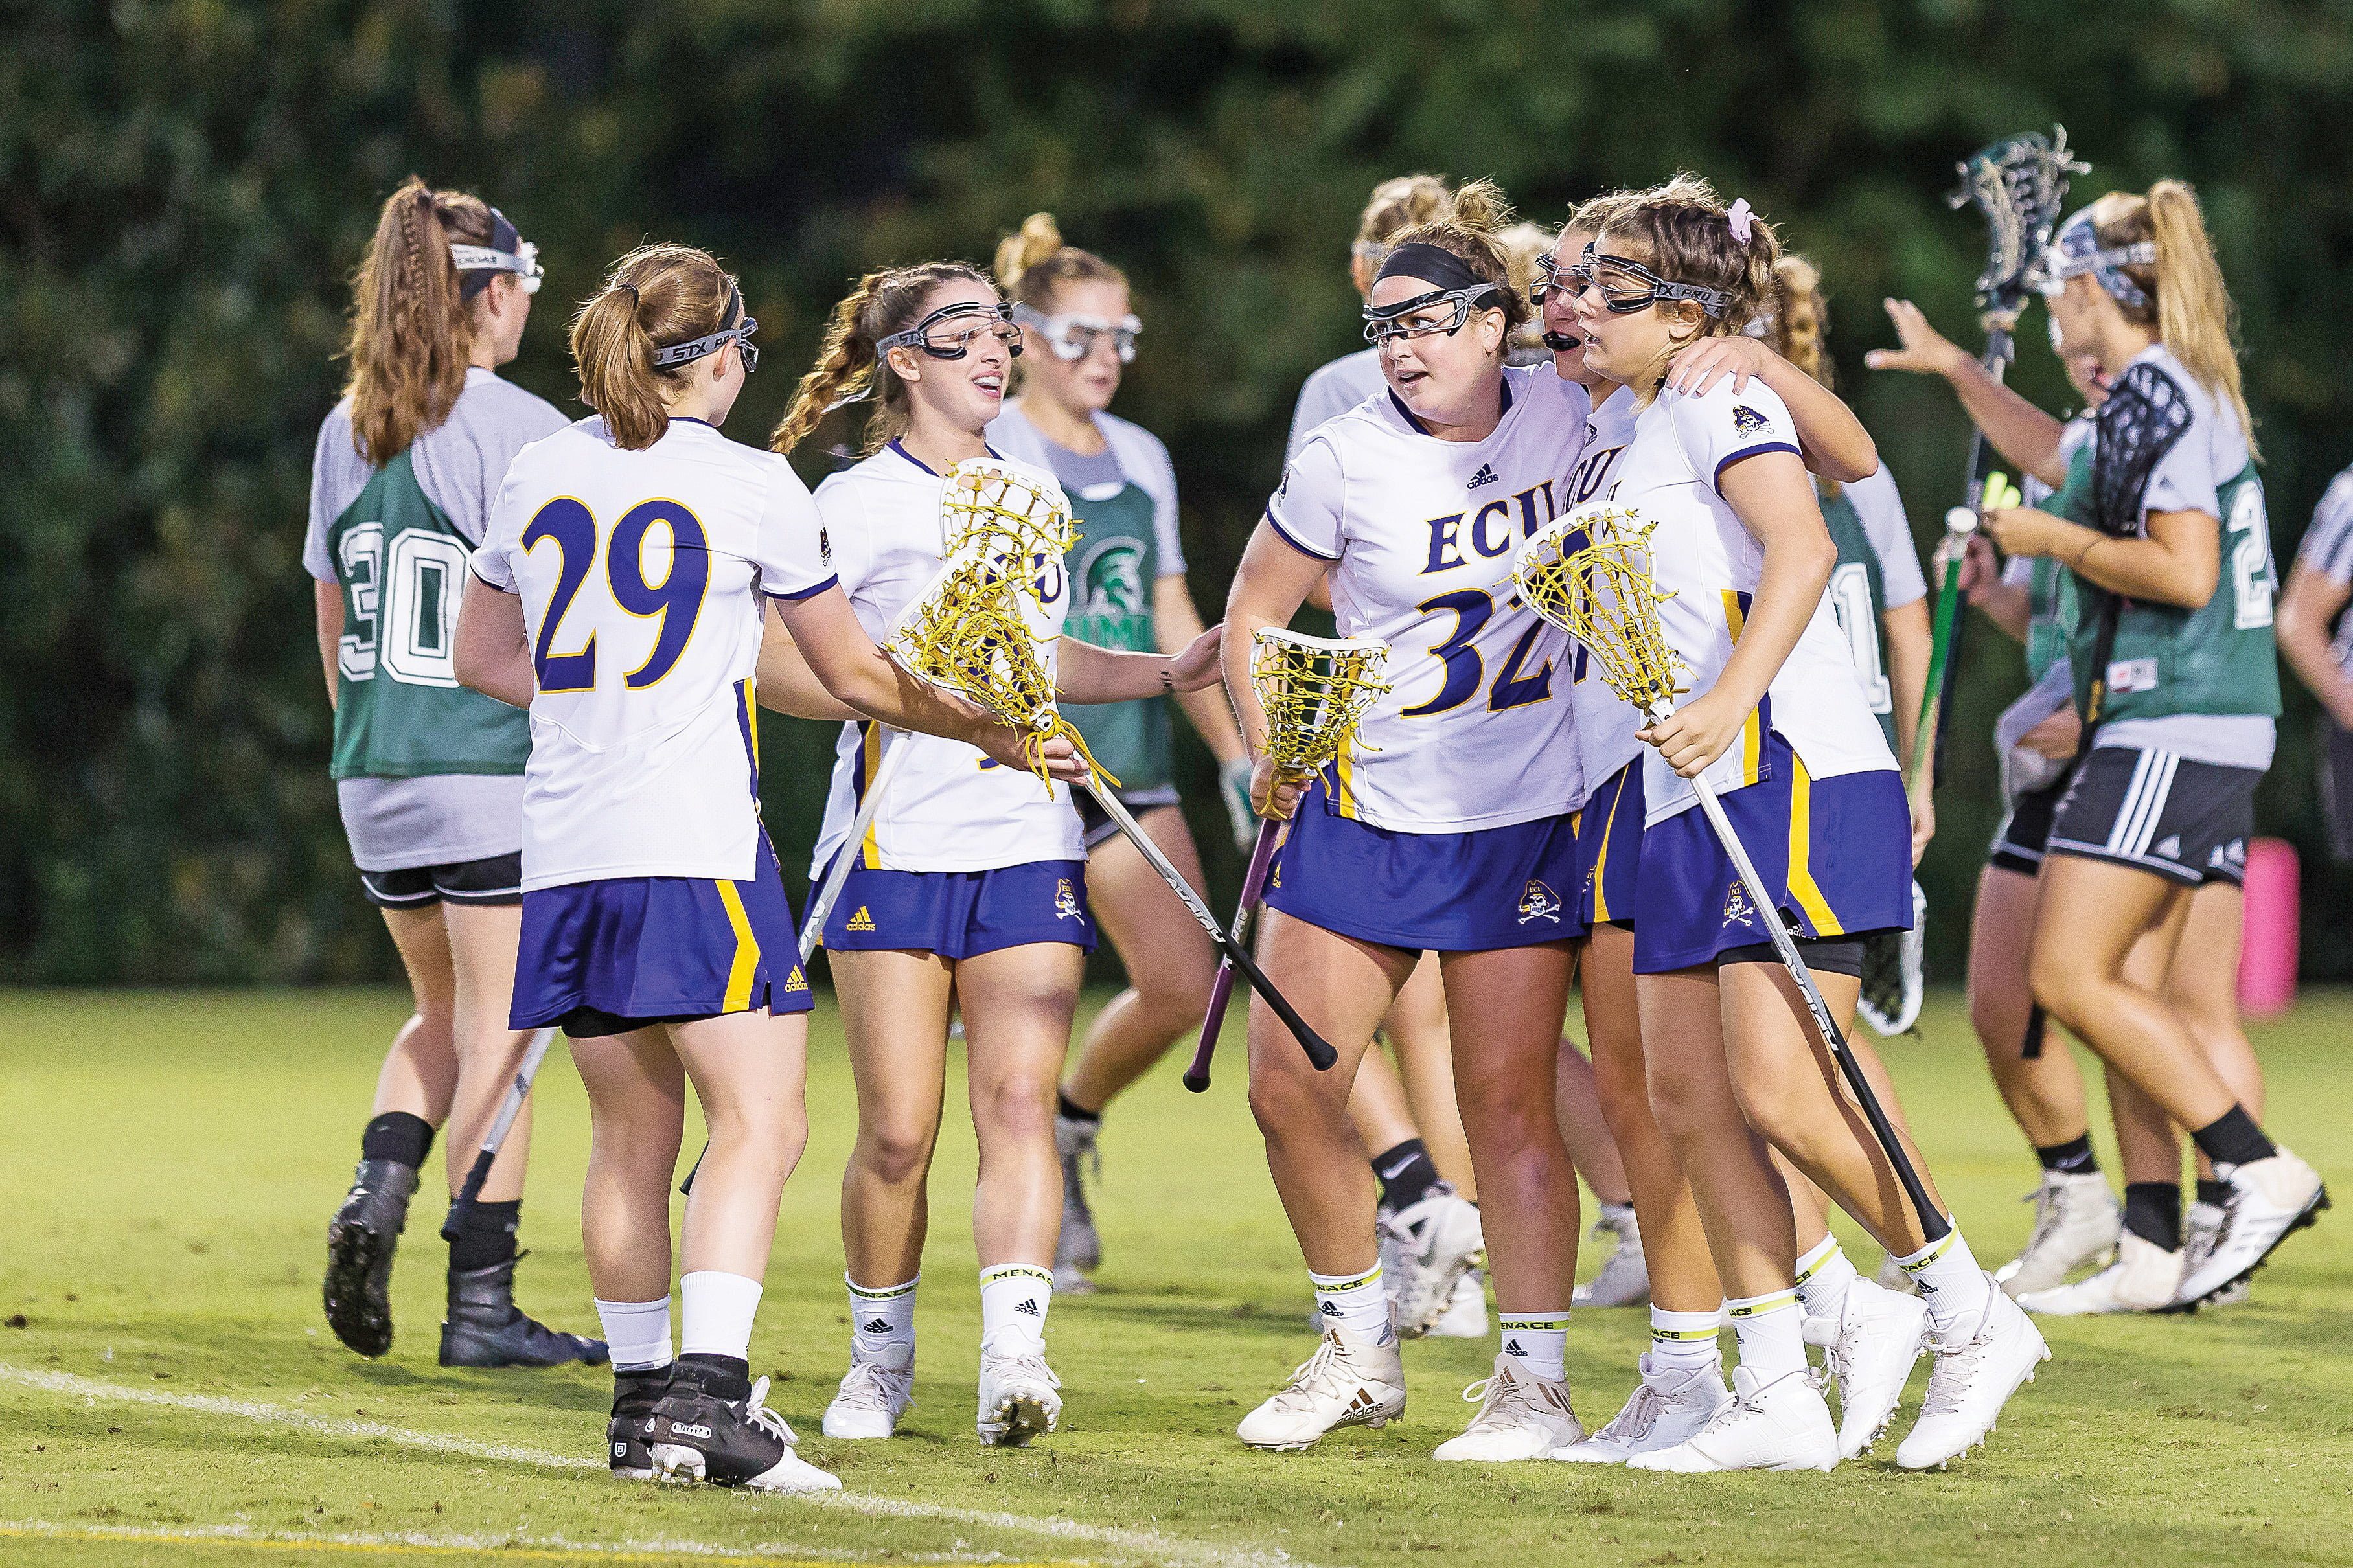 ecu-women-s-lacrosse-launches-this-weekend-the-north-state-journal